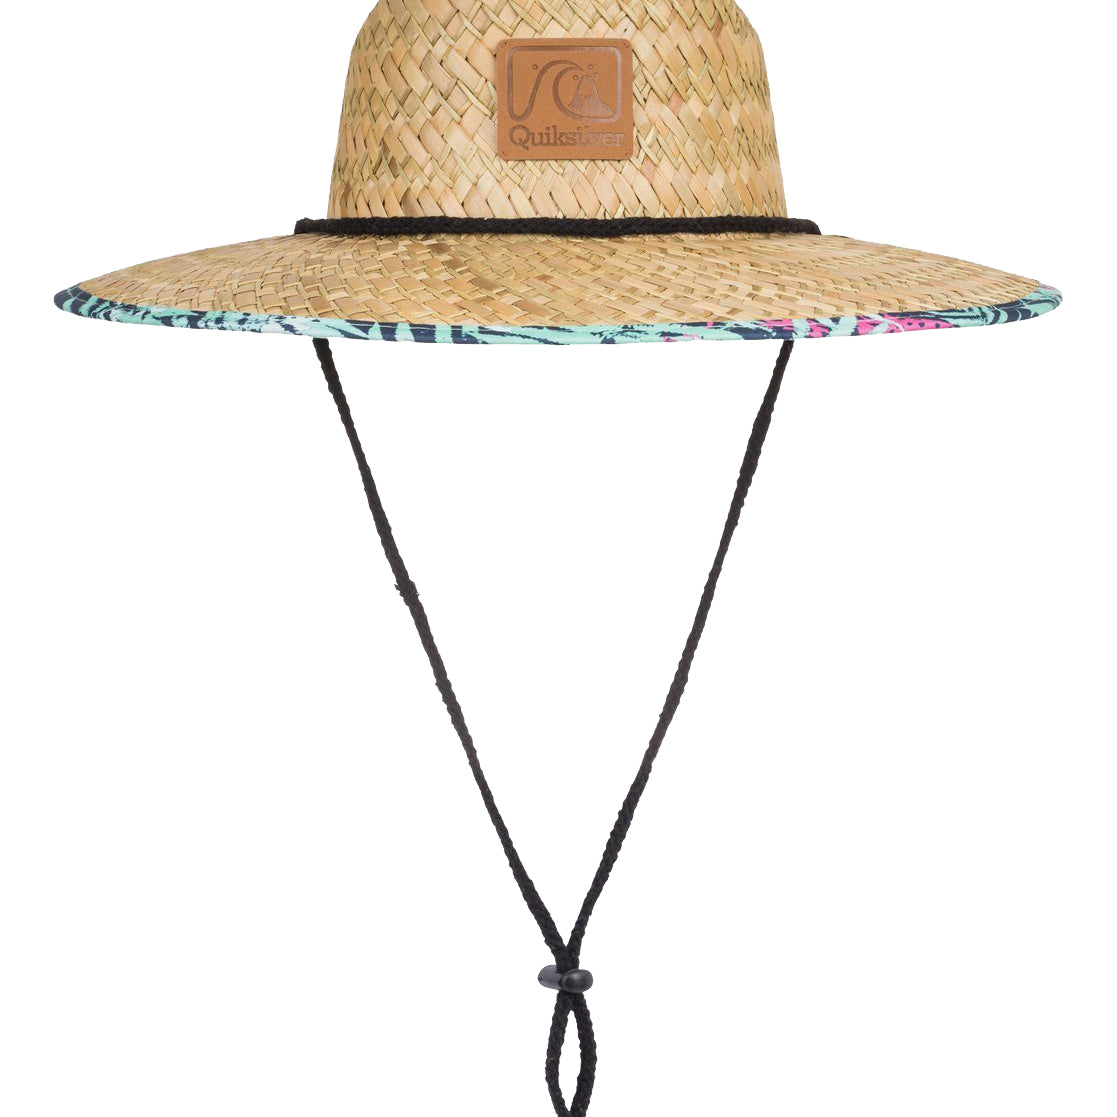 Quiksilver Outsider Straw Lifeguard Hat BSM0 S/M